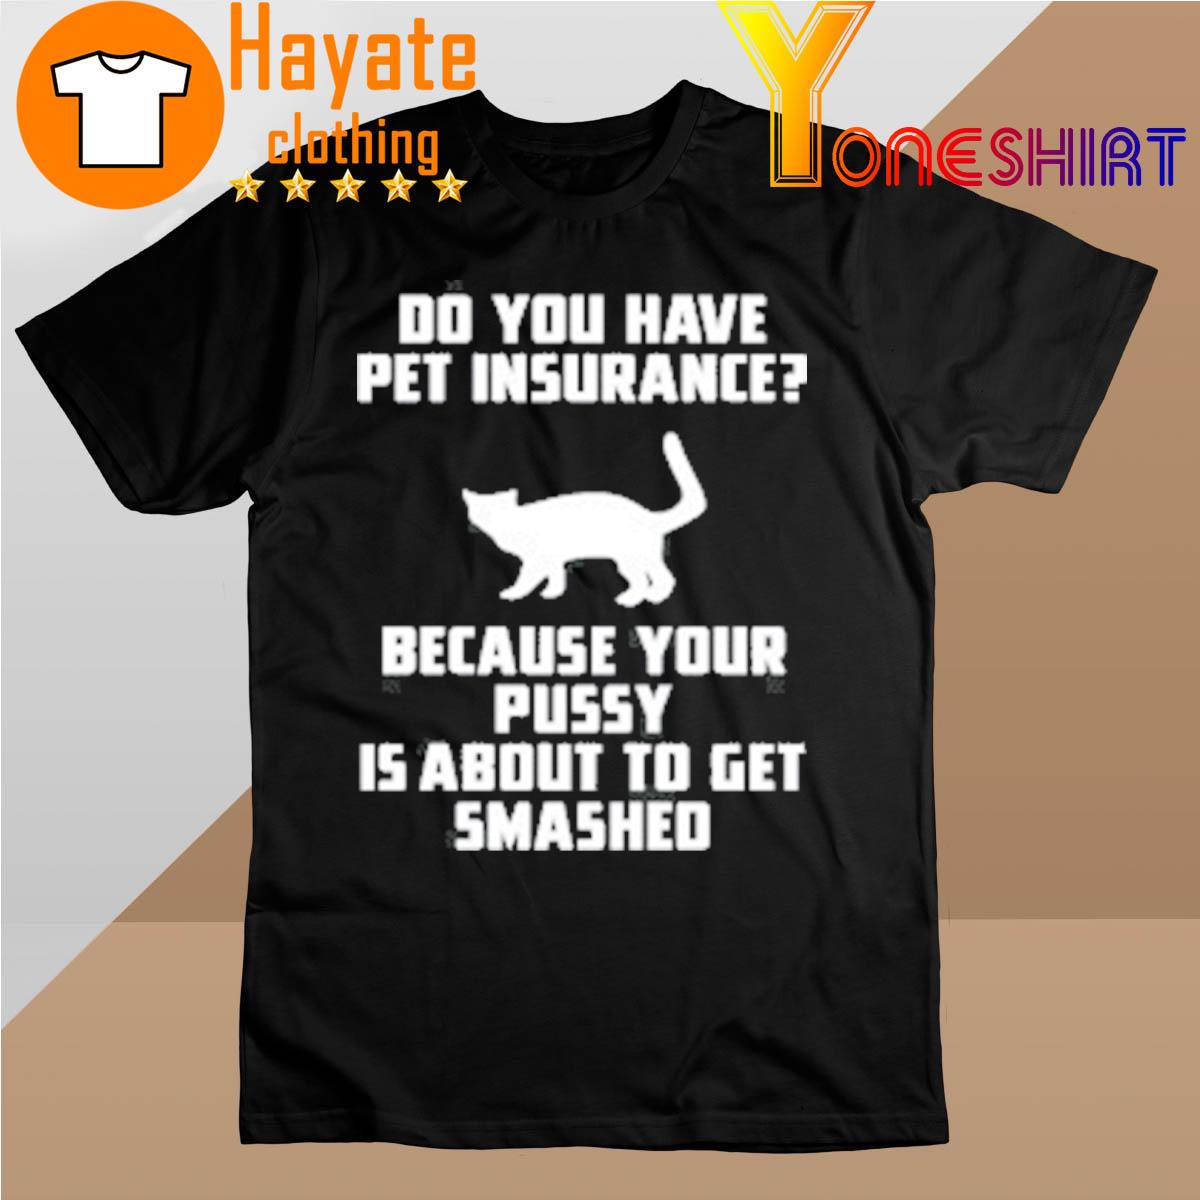 Do You Have Pet Insurance Because Your Pussy Is About To Get Smashed Shirt